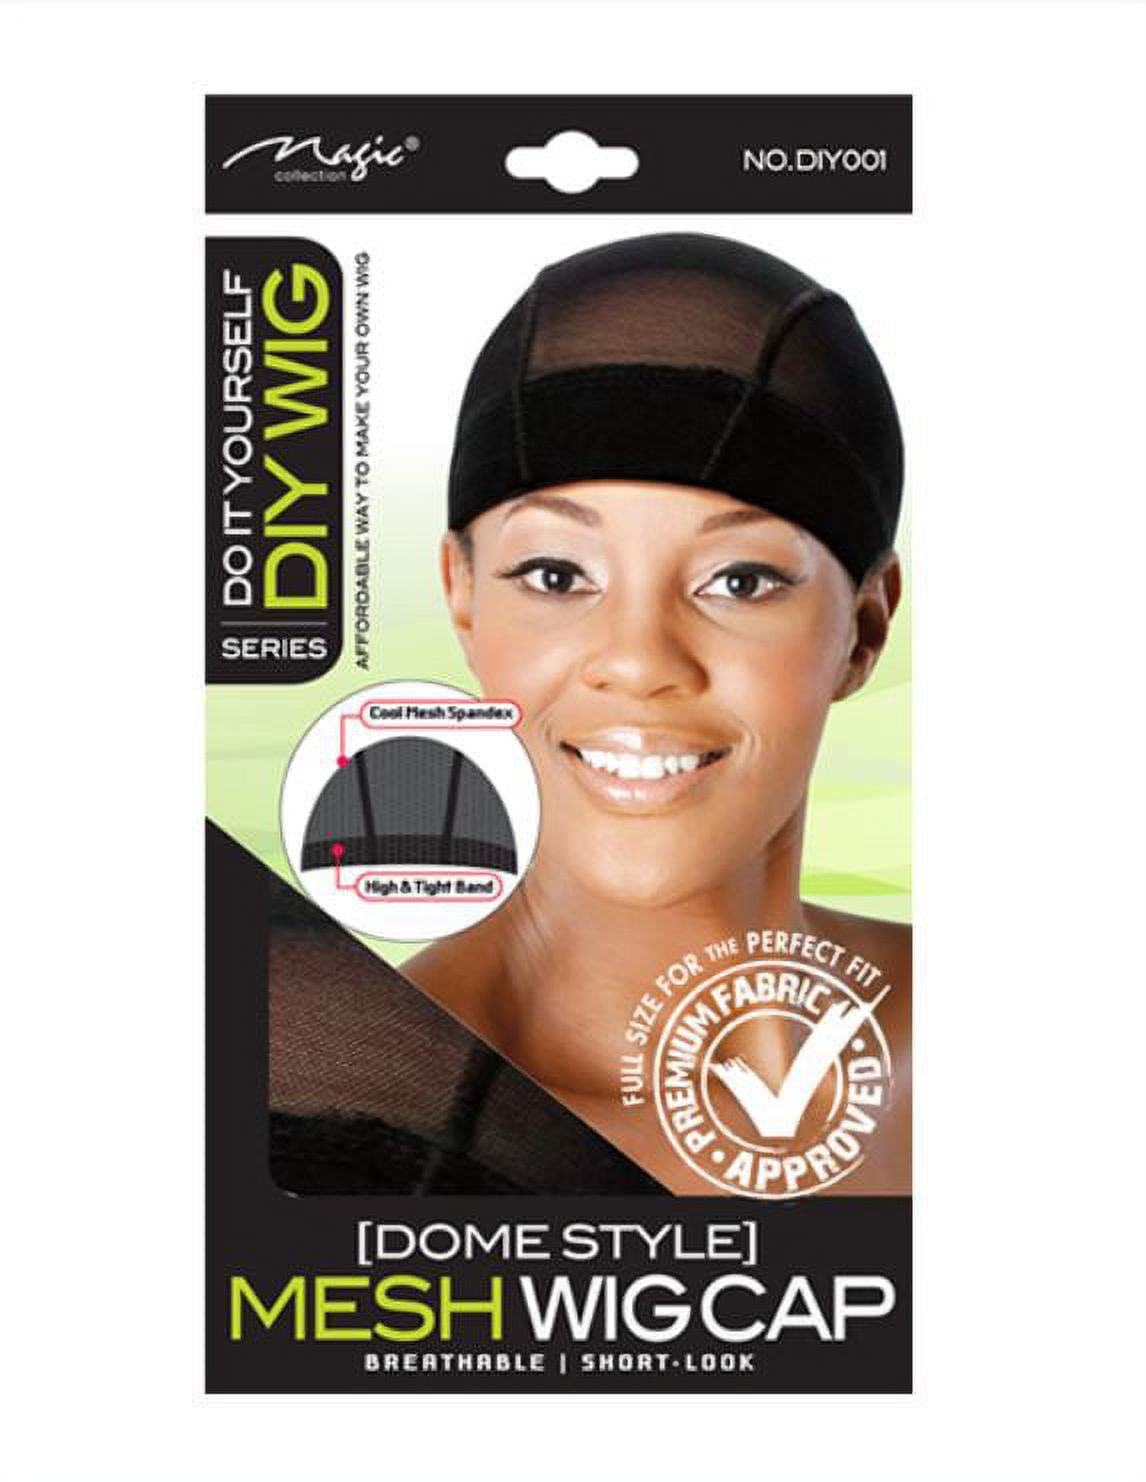 Elastic Band Method: Make your wig fit your head perfectly! -Wigginshair